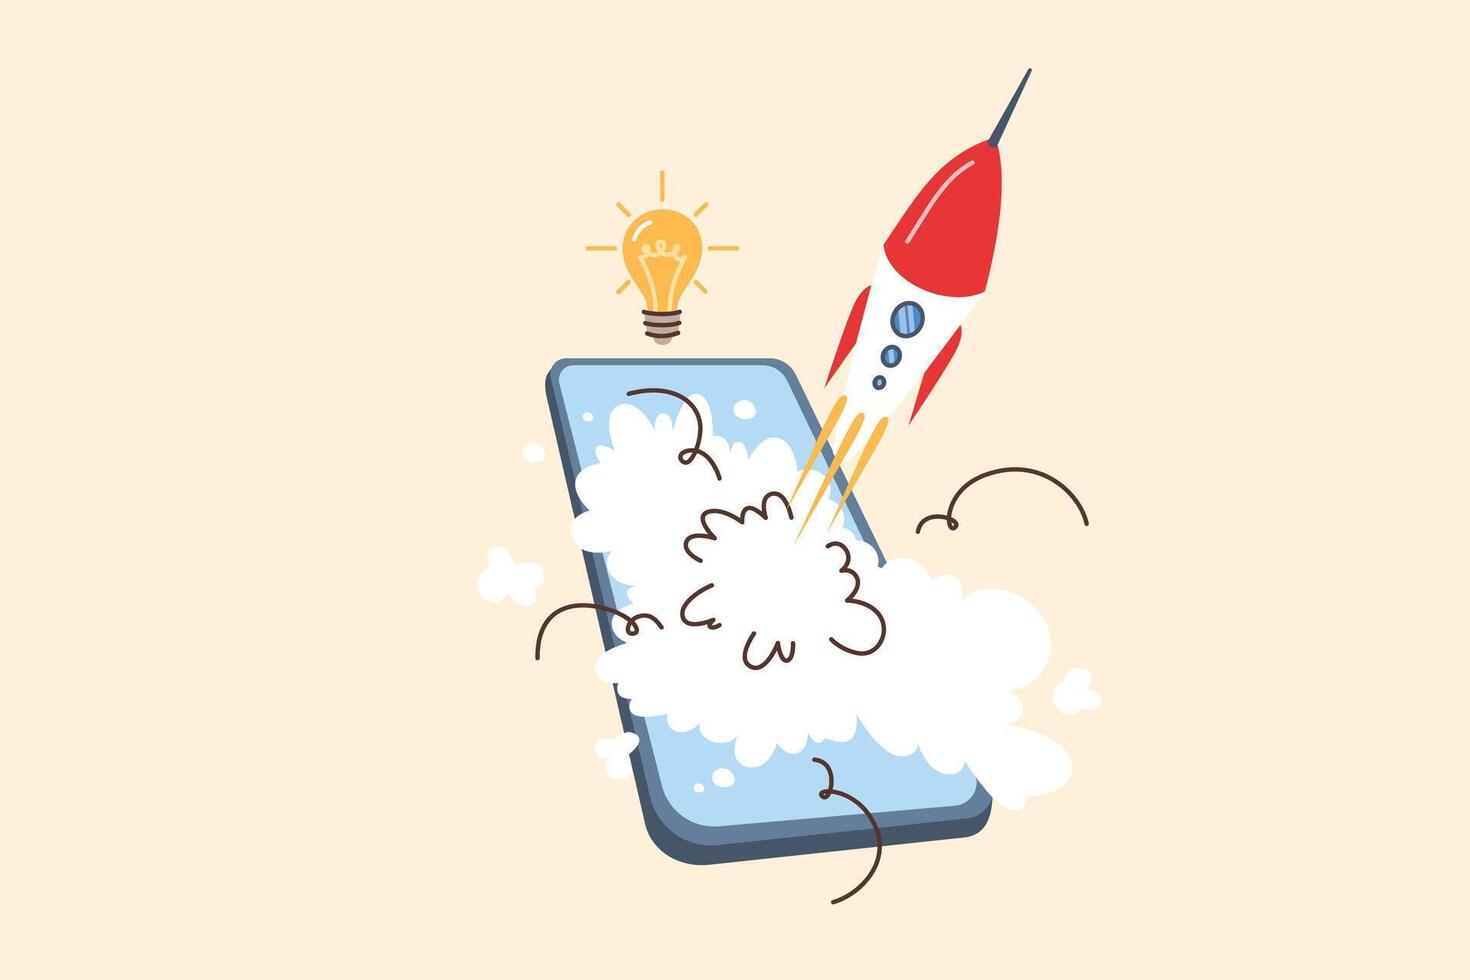 Mobile phone with rocket launch, metaphor for new startup with application for smartphone users vector